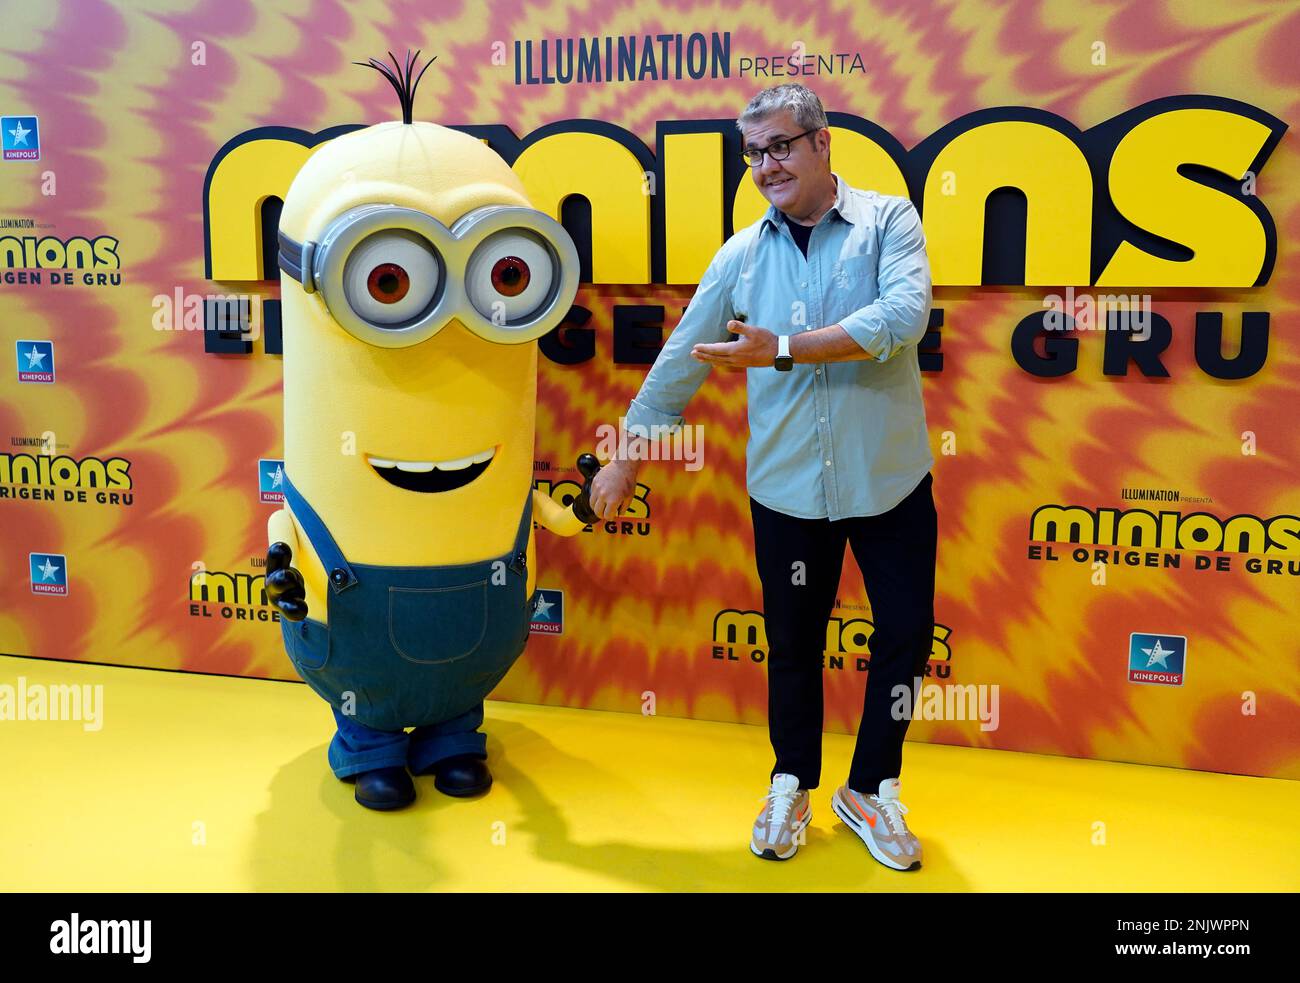 Florentino Fernández attends the premiere of the new movie of the Minions  saga, which comes to theaters with 'El origen de Gru', on June 27, 2022, in  Madrid (Spain). CINEMA;MOVIE;PHOTOCALL;PEOPLE Ángel Díaz